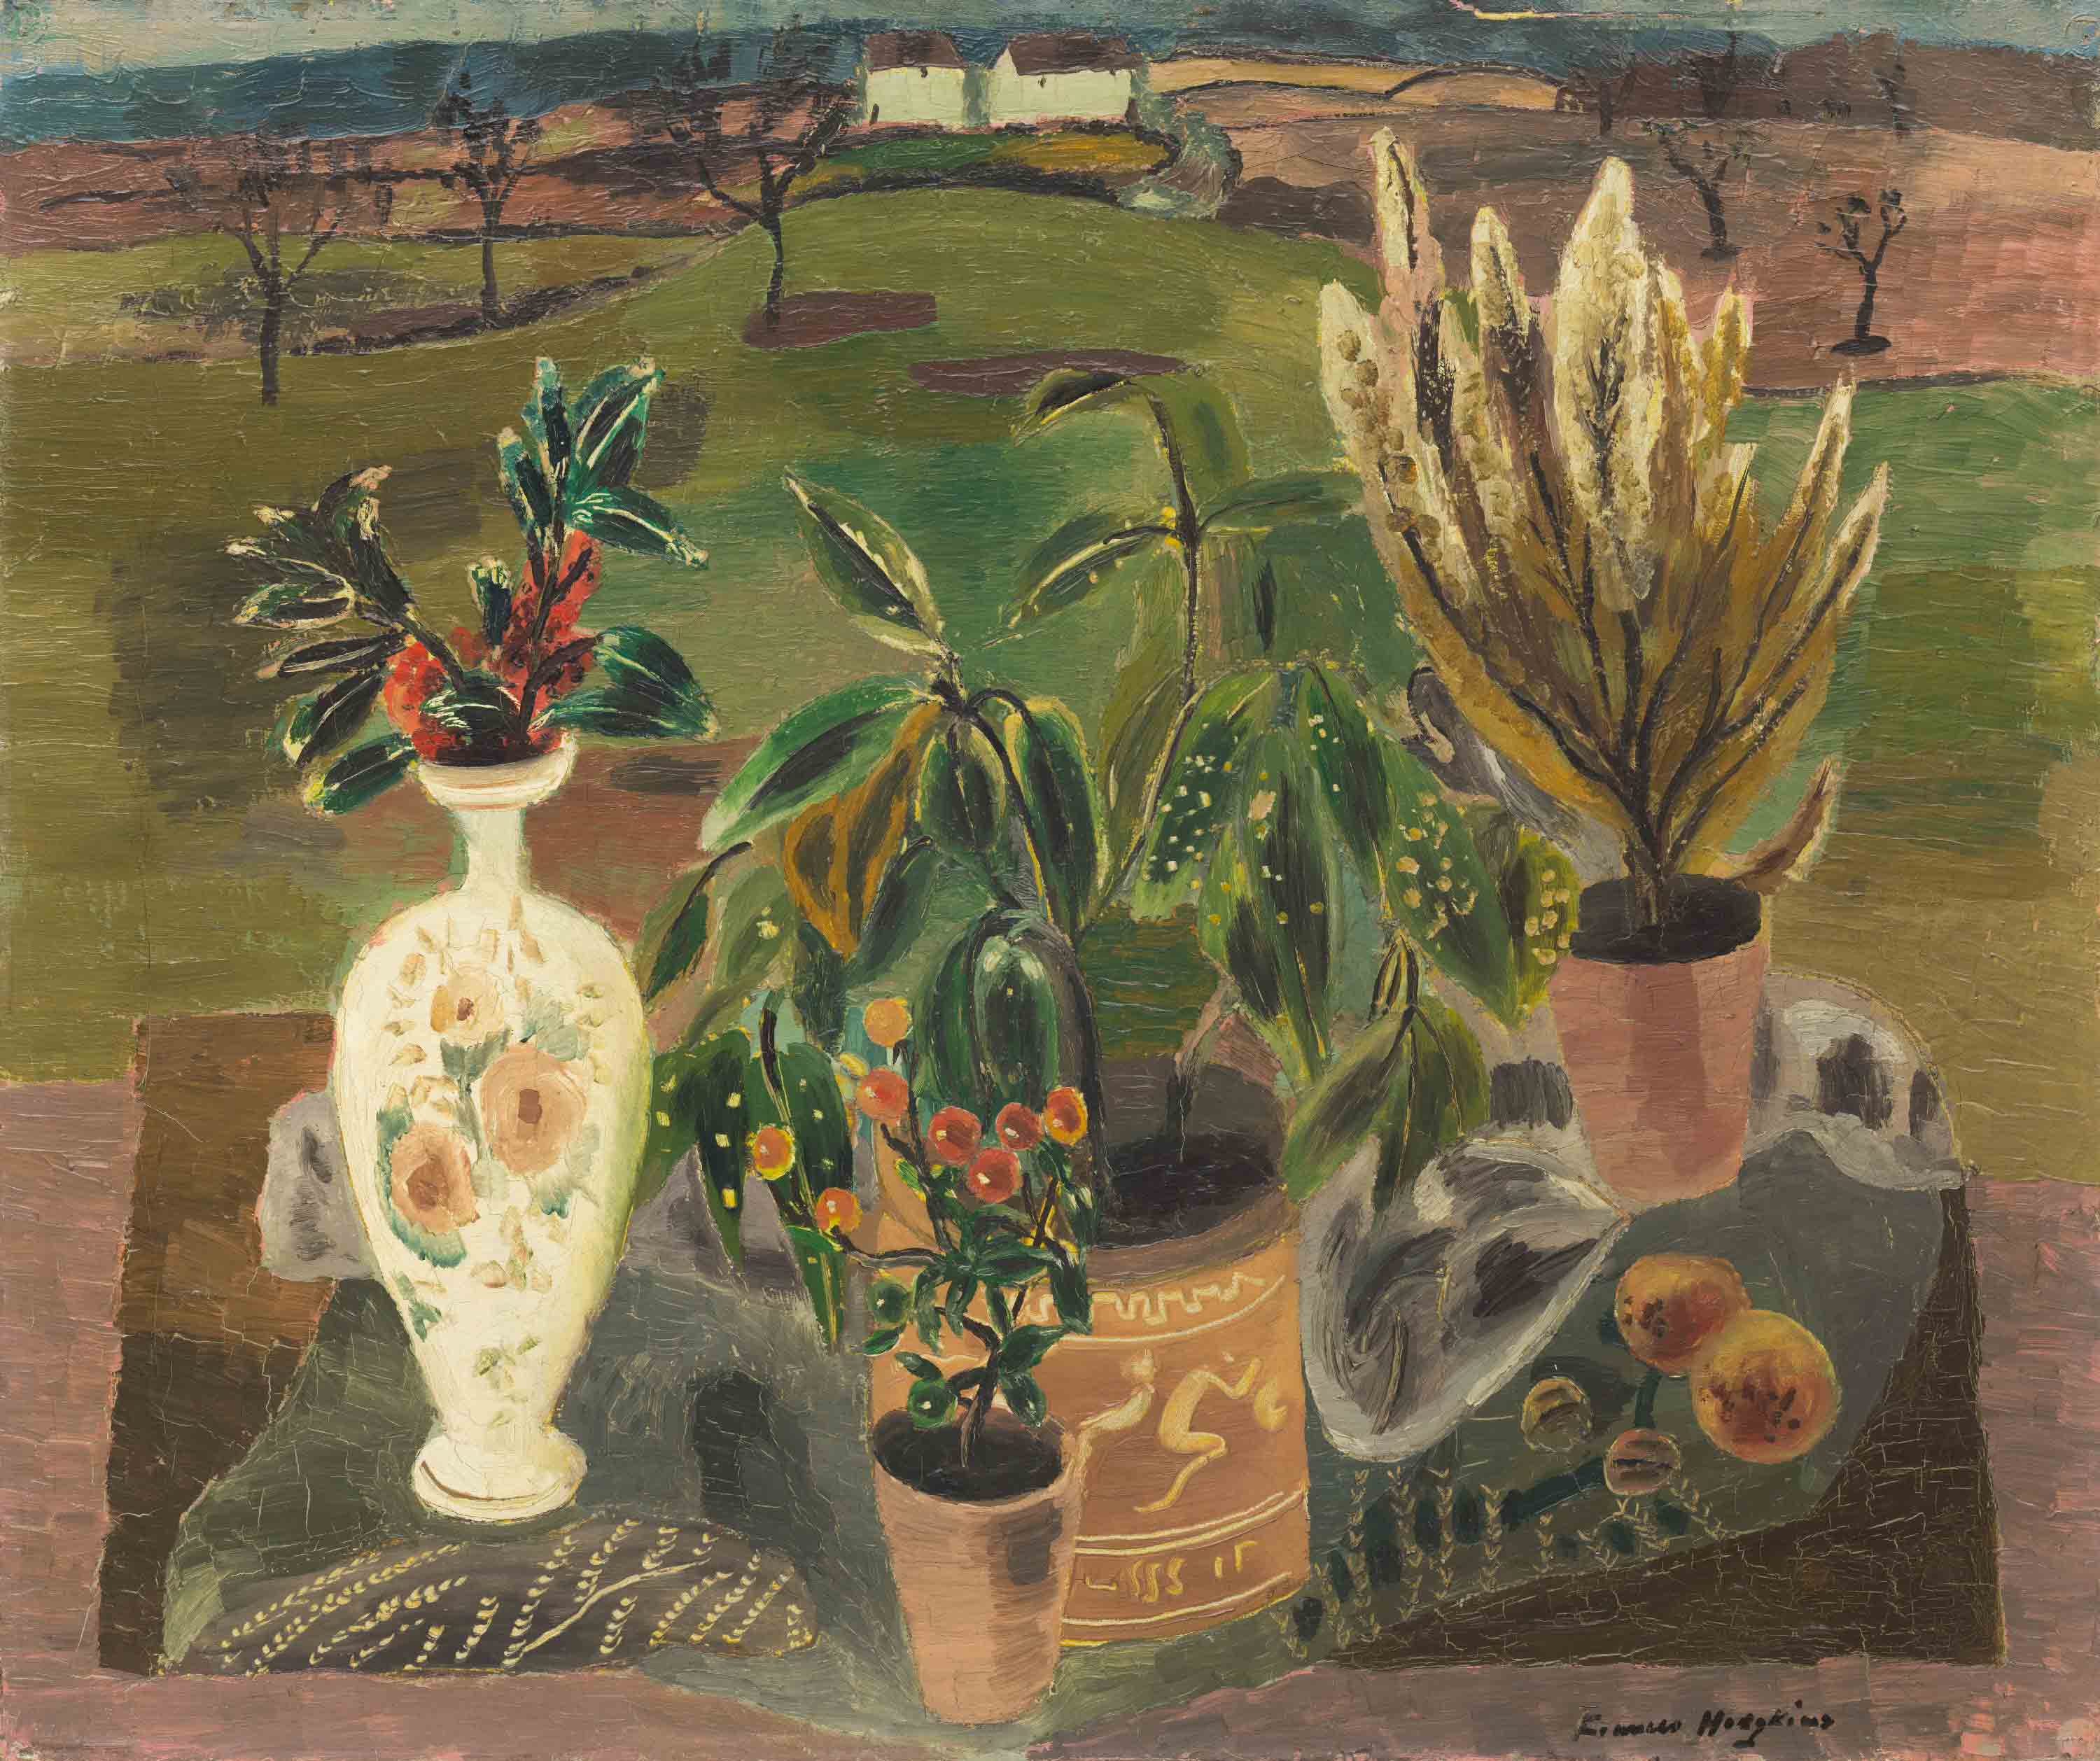 <p><strong>Frances Hodgkins</strong>,<em>&nbsp;Berries and Laurel</em>, circa 1930, Auckland Art Gallery Toi o Tāmaki, purchased with funds from the William James Jobson Trust, 1982</p>
